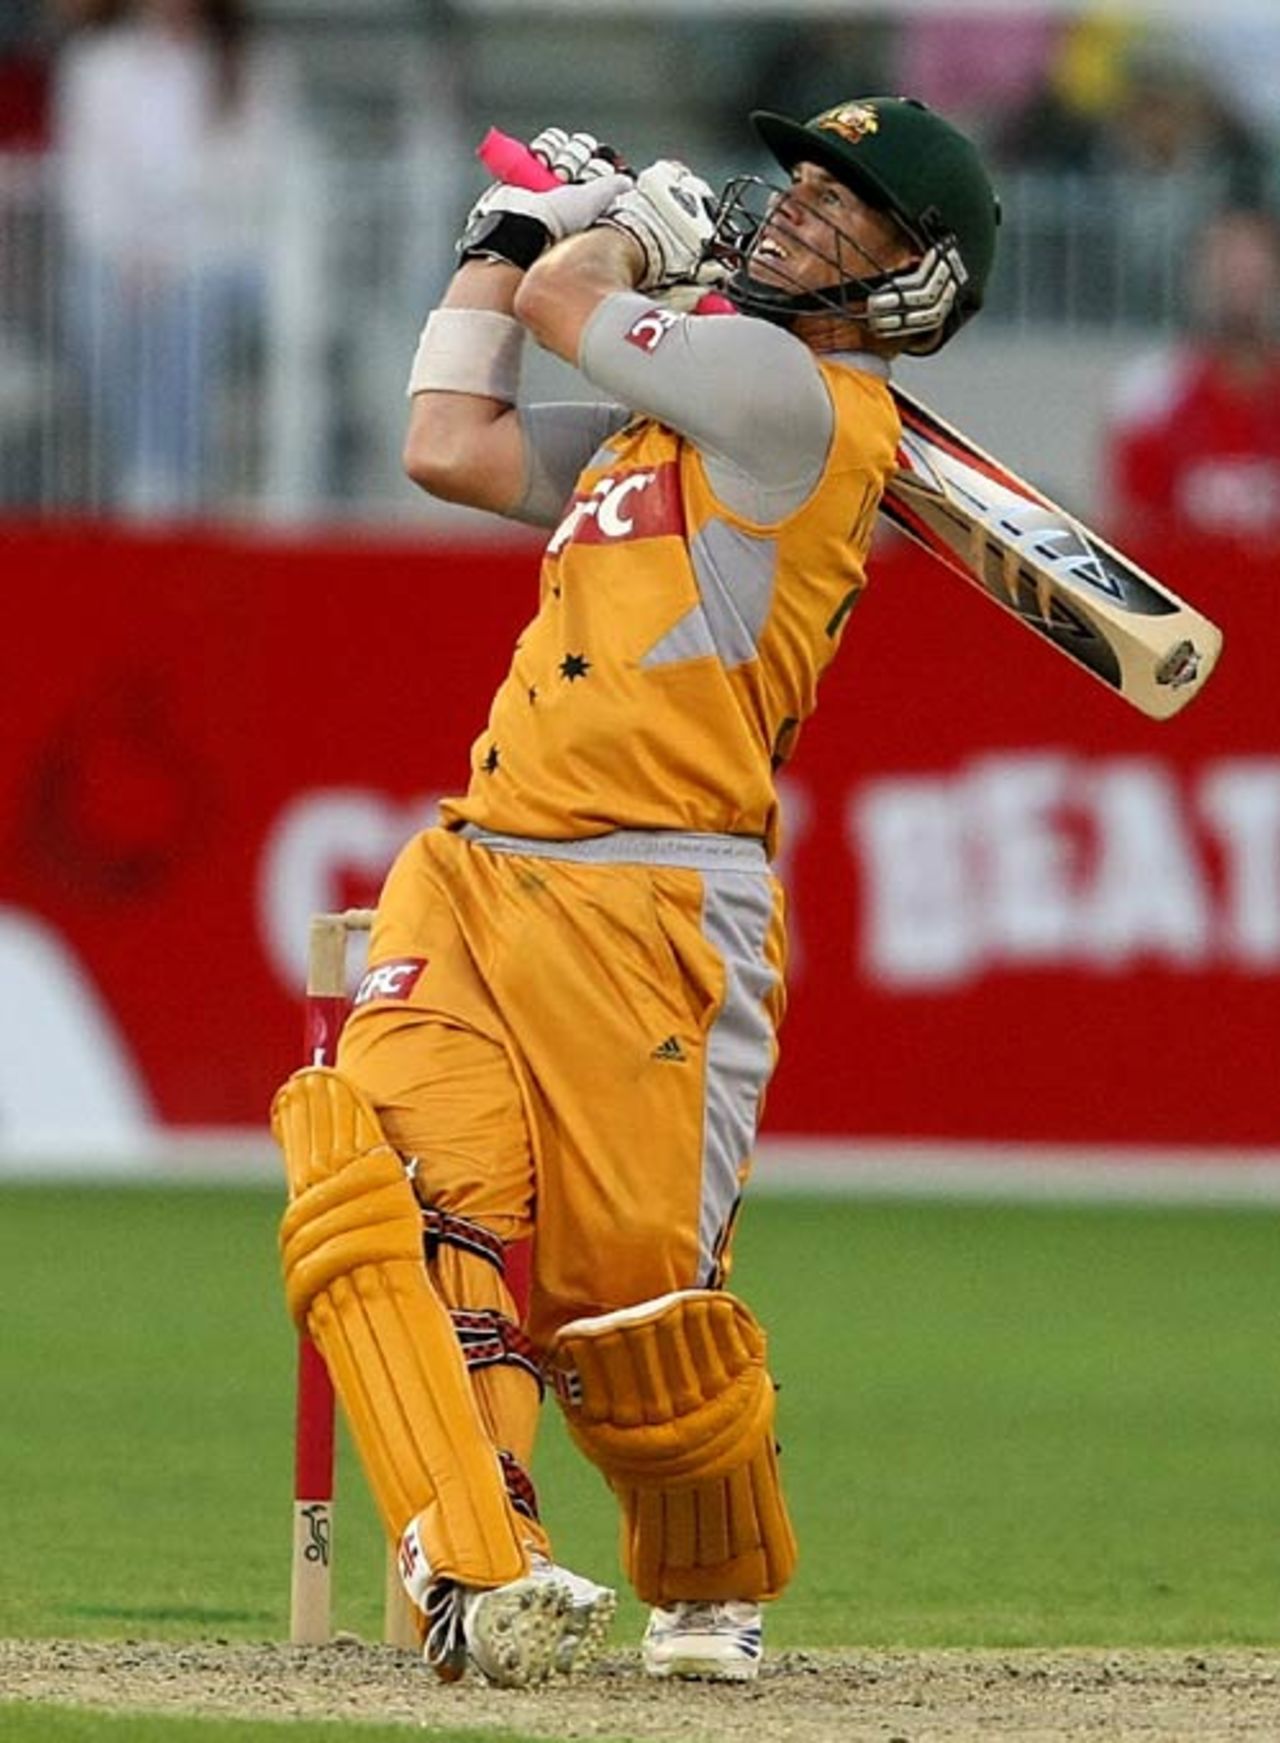 David Warner launches a huge six over midwicket on his way to 89 on debut, Australia v South Africa, 1st Twenty20 international, Melbourne, January 11, 2009